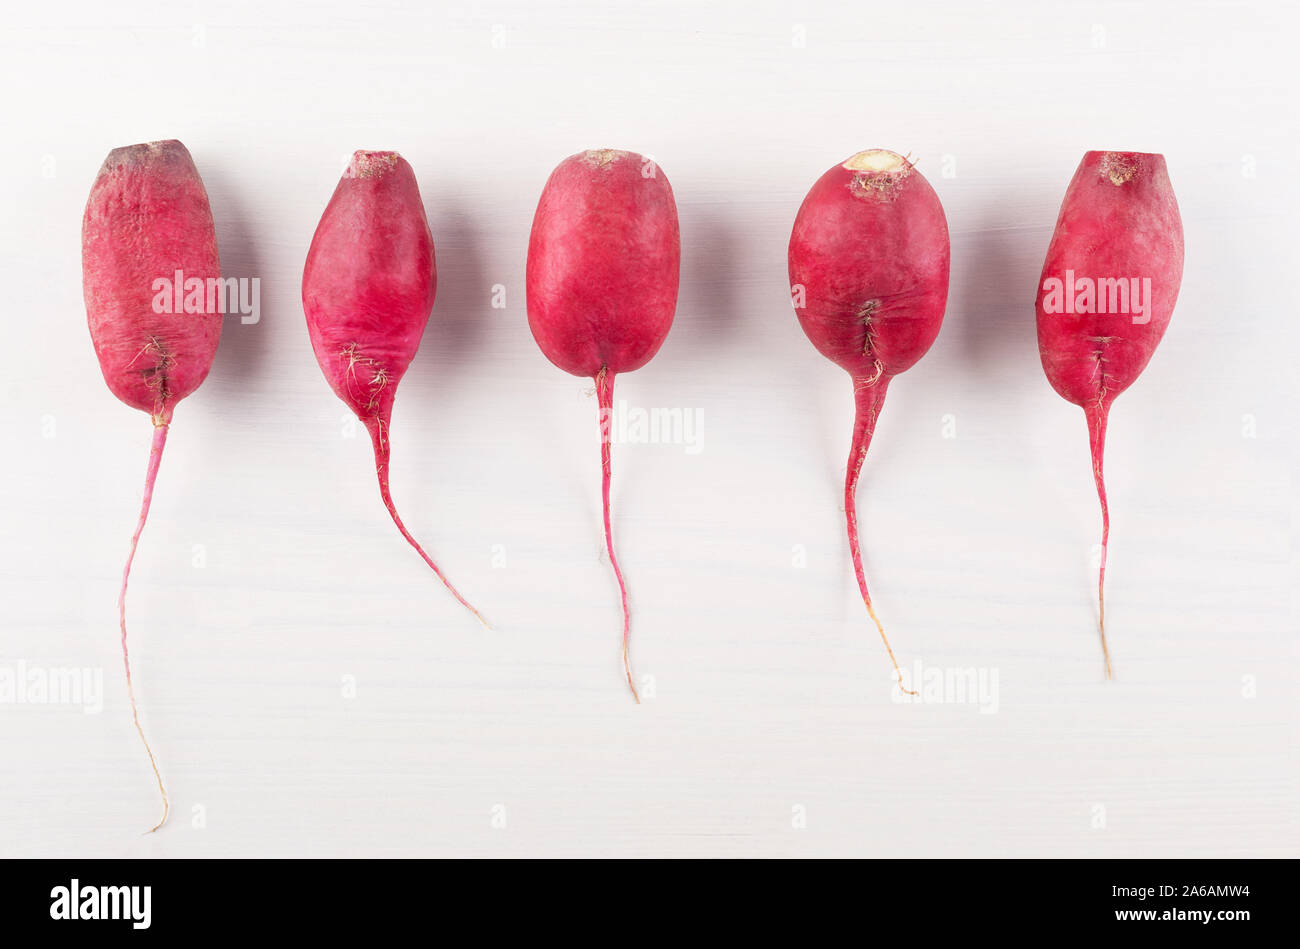 Imperfect Organic homegrown long radishes on white background.  Weird-looking fruits and vegetables. Imperfect produce help fight food waste .Flat lay. Stock Photo